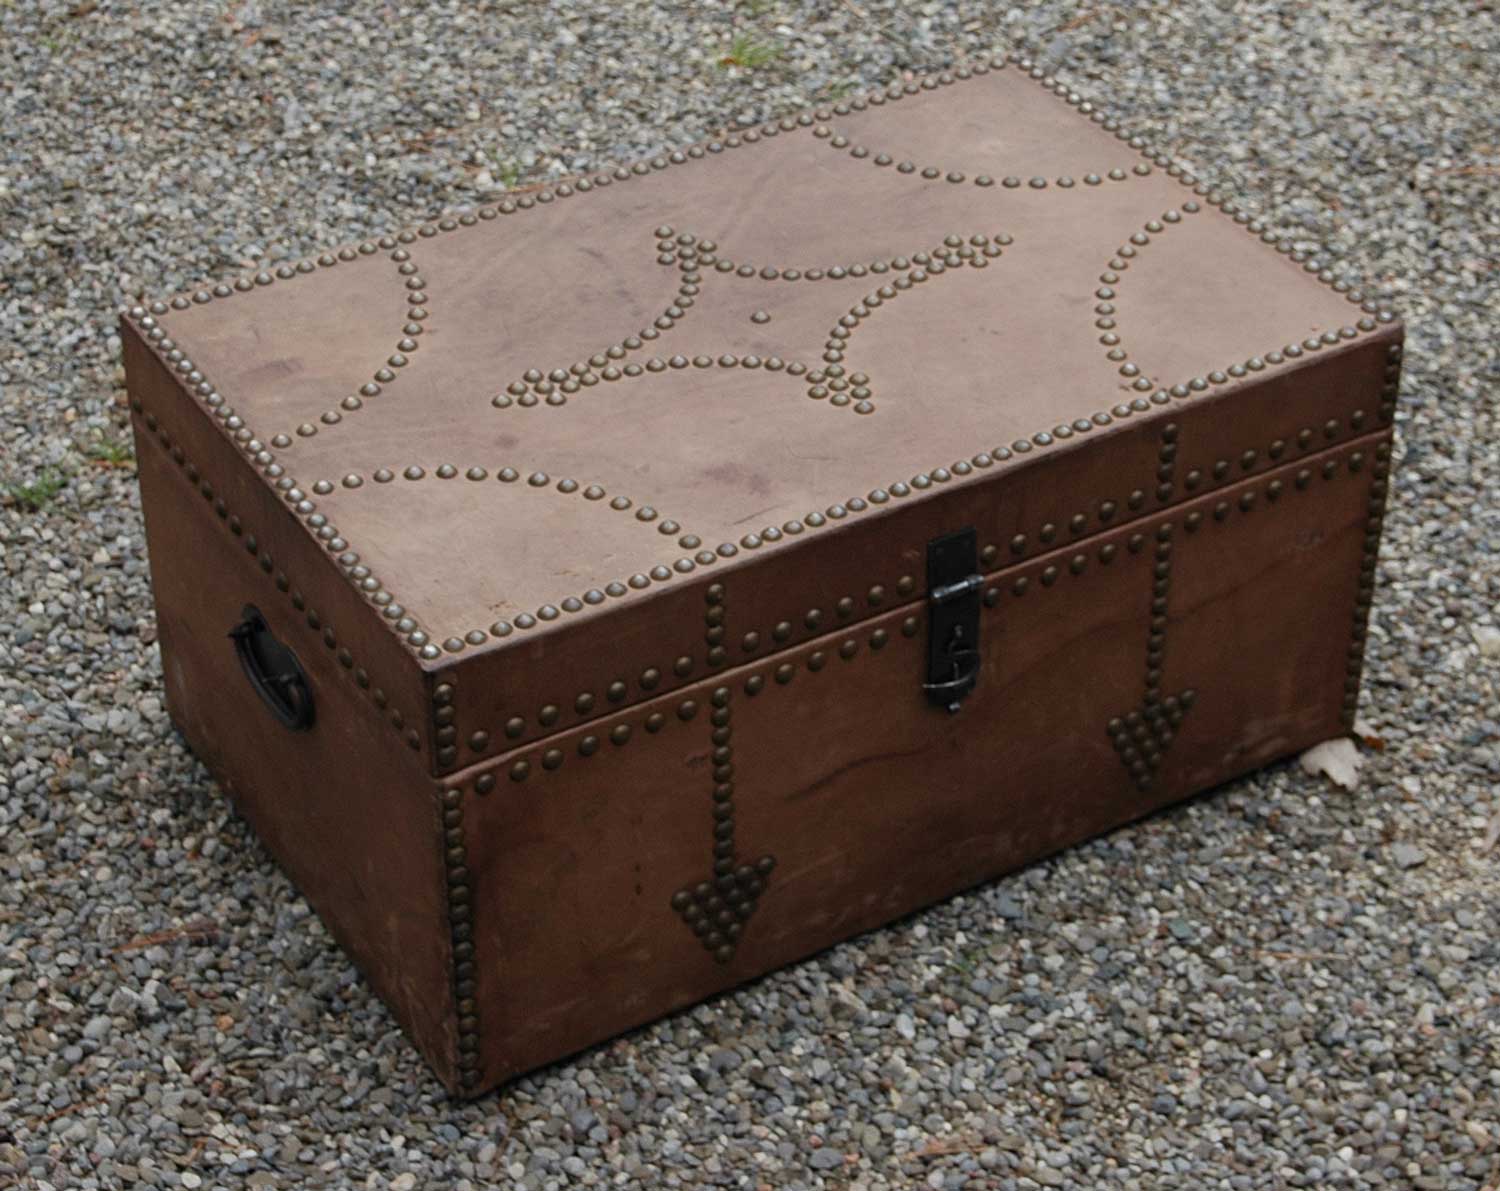 15 x 23.5 x 11.5" leather trunk